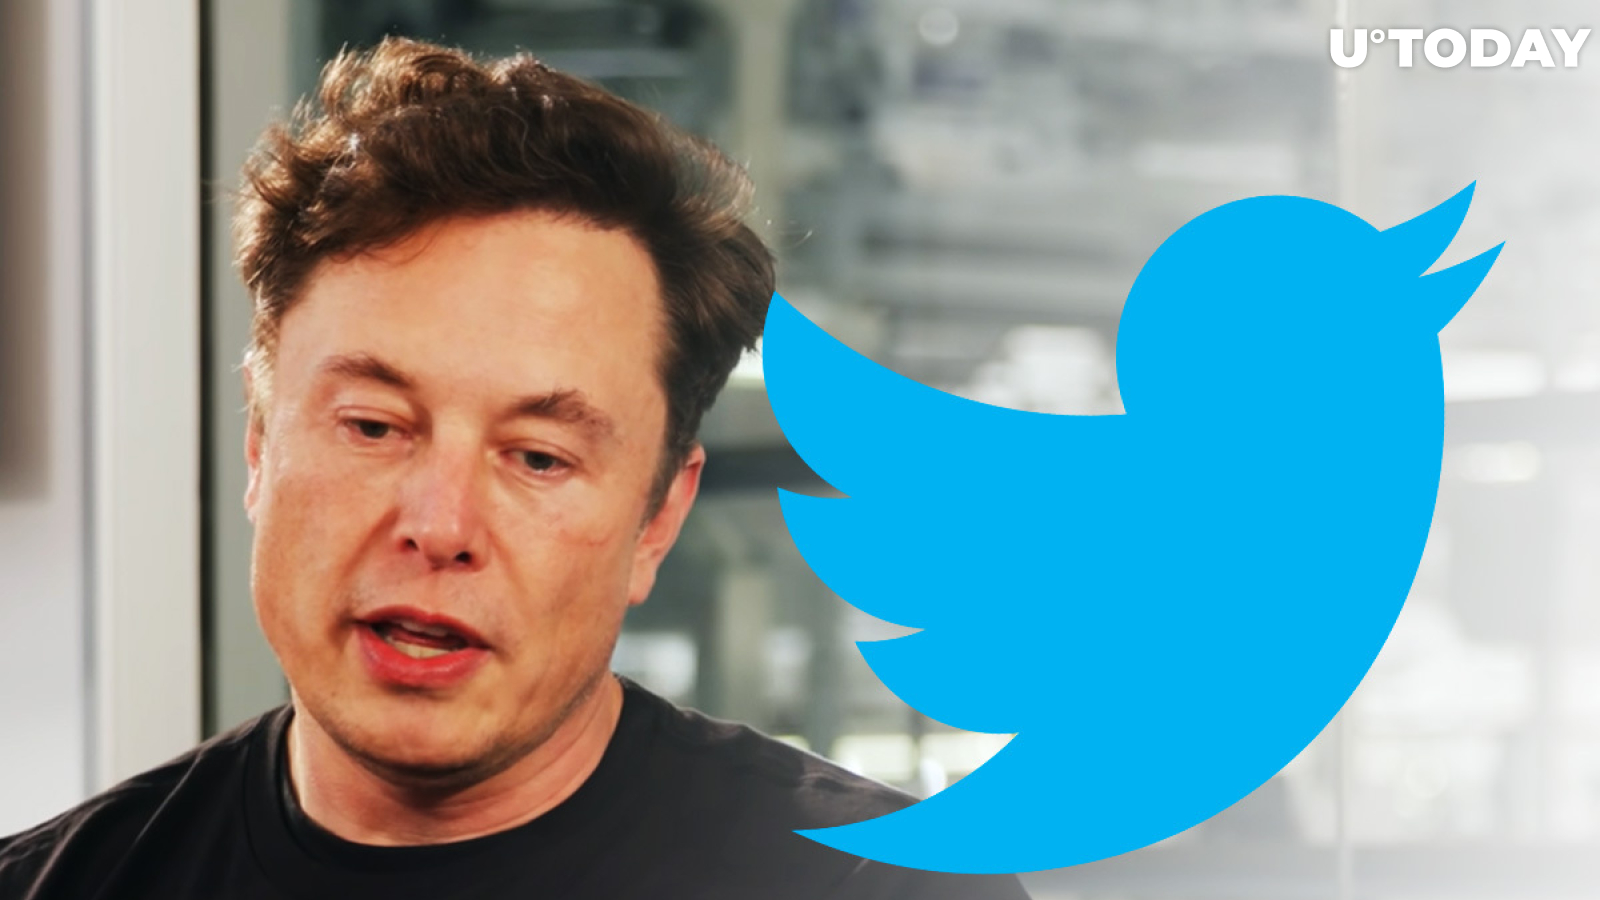 Elon Musk Echoes Bitcoin Cash Supporters with Latest Tweet